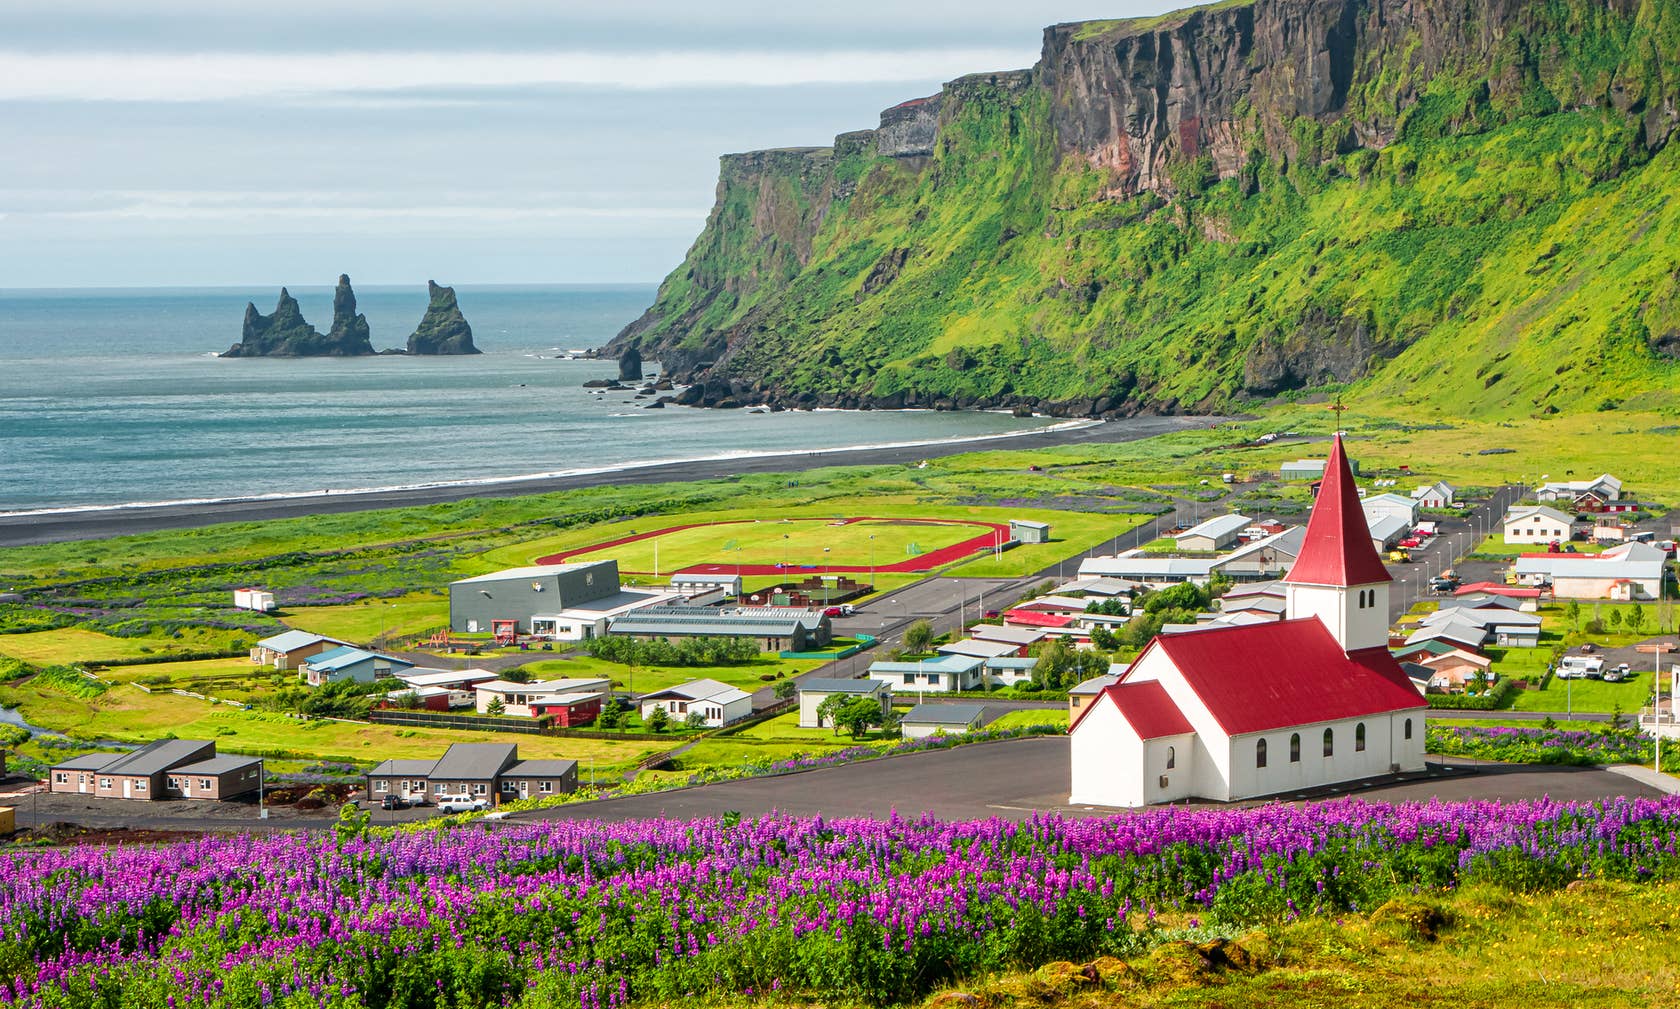 Holiday rentals in Iceland